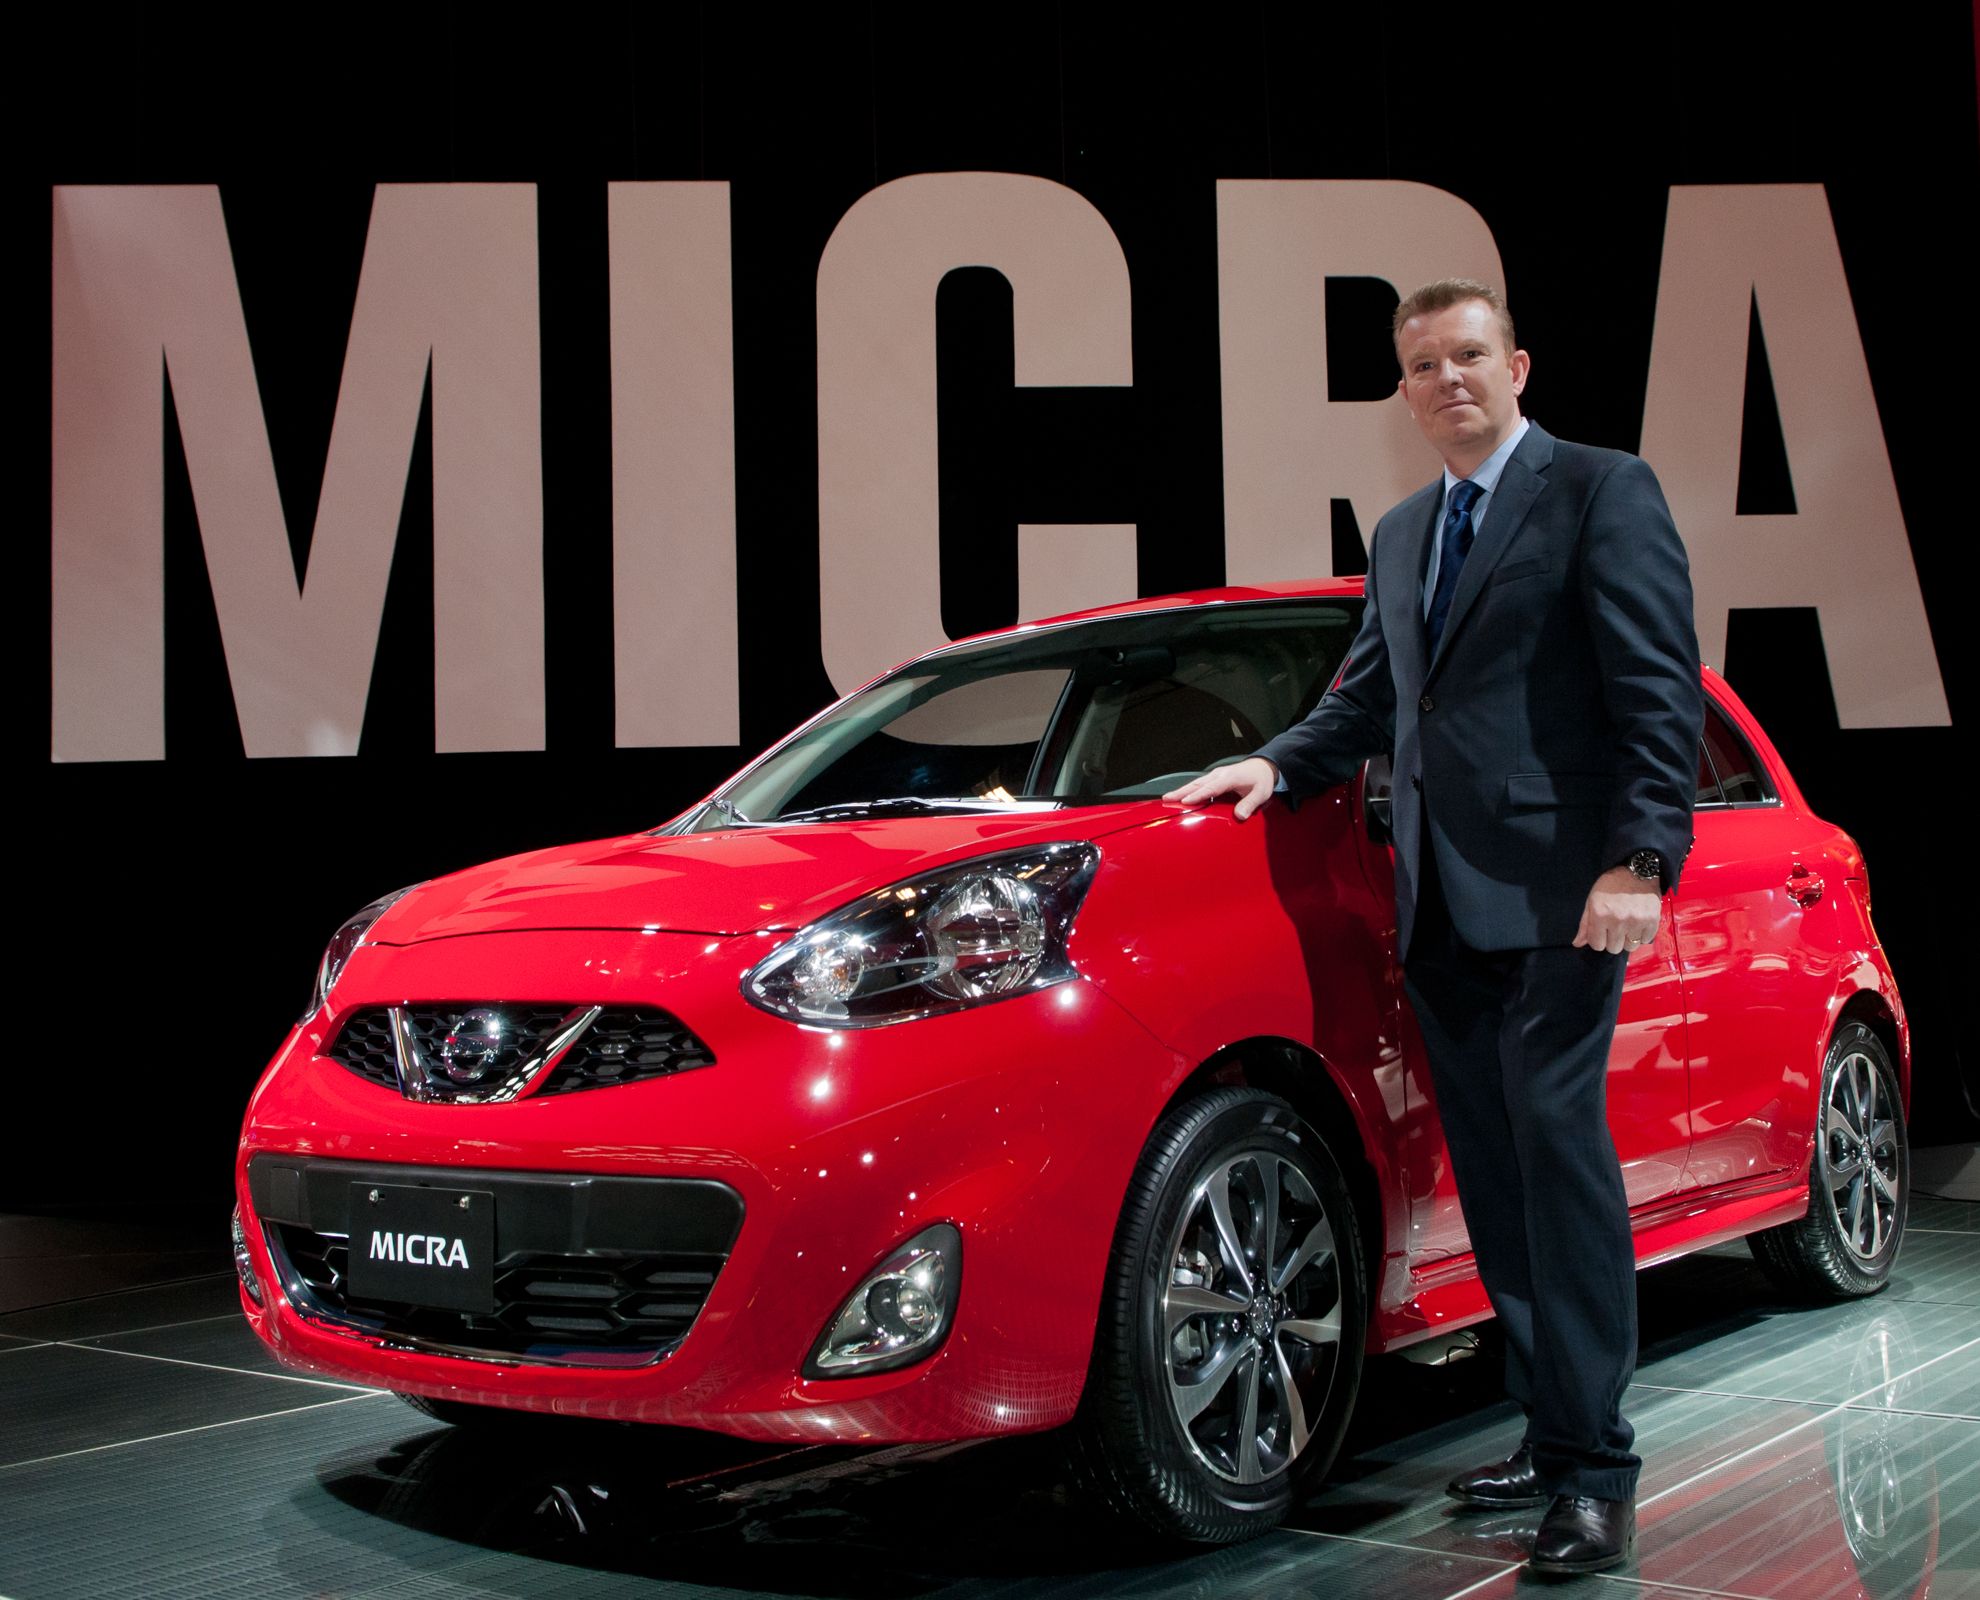 2015 NISSAN MICRA DEBUTS AT 2014 MONTREAL AUTO SHOW